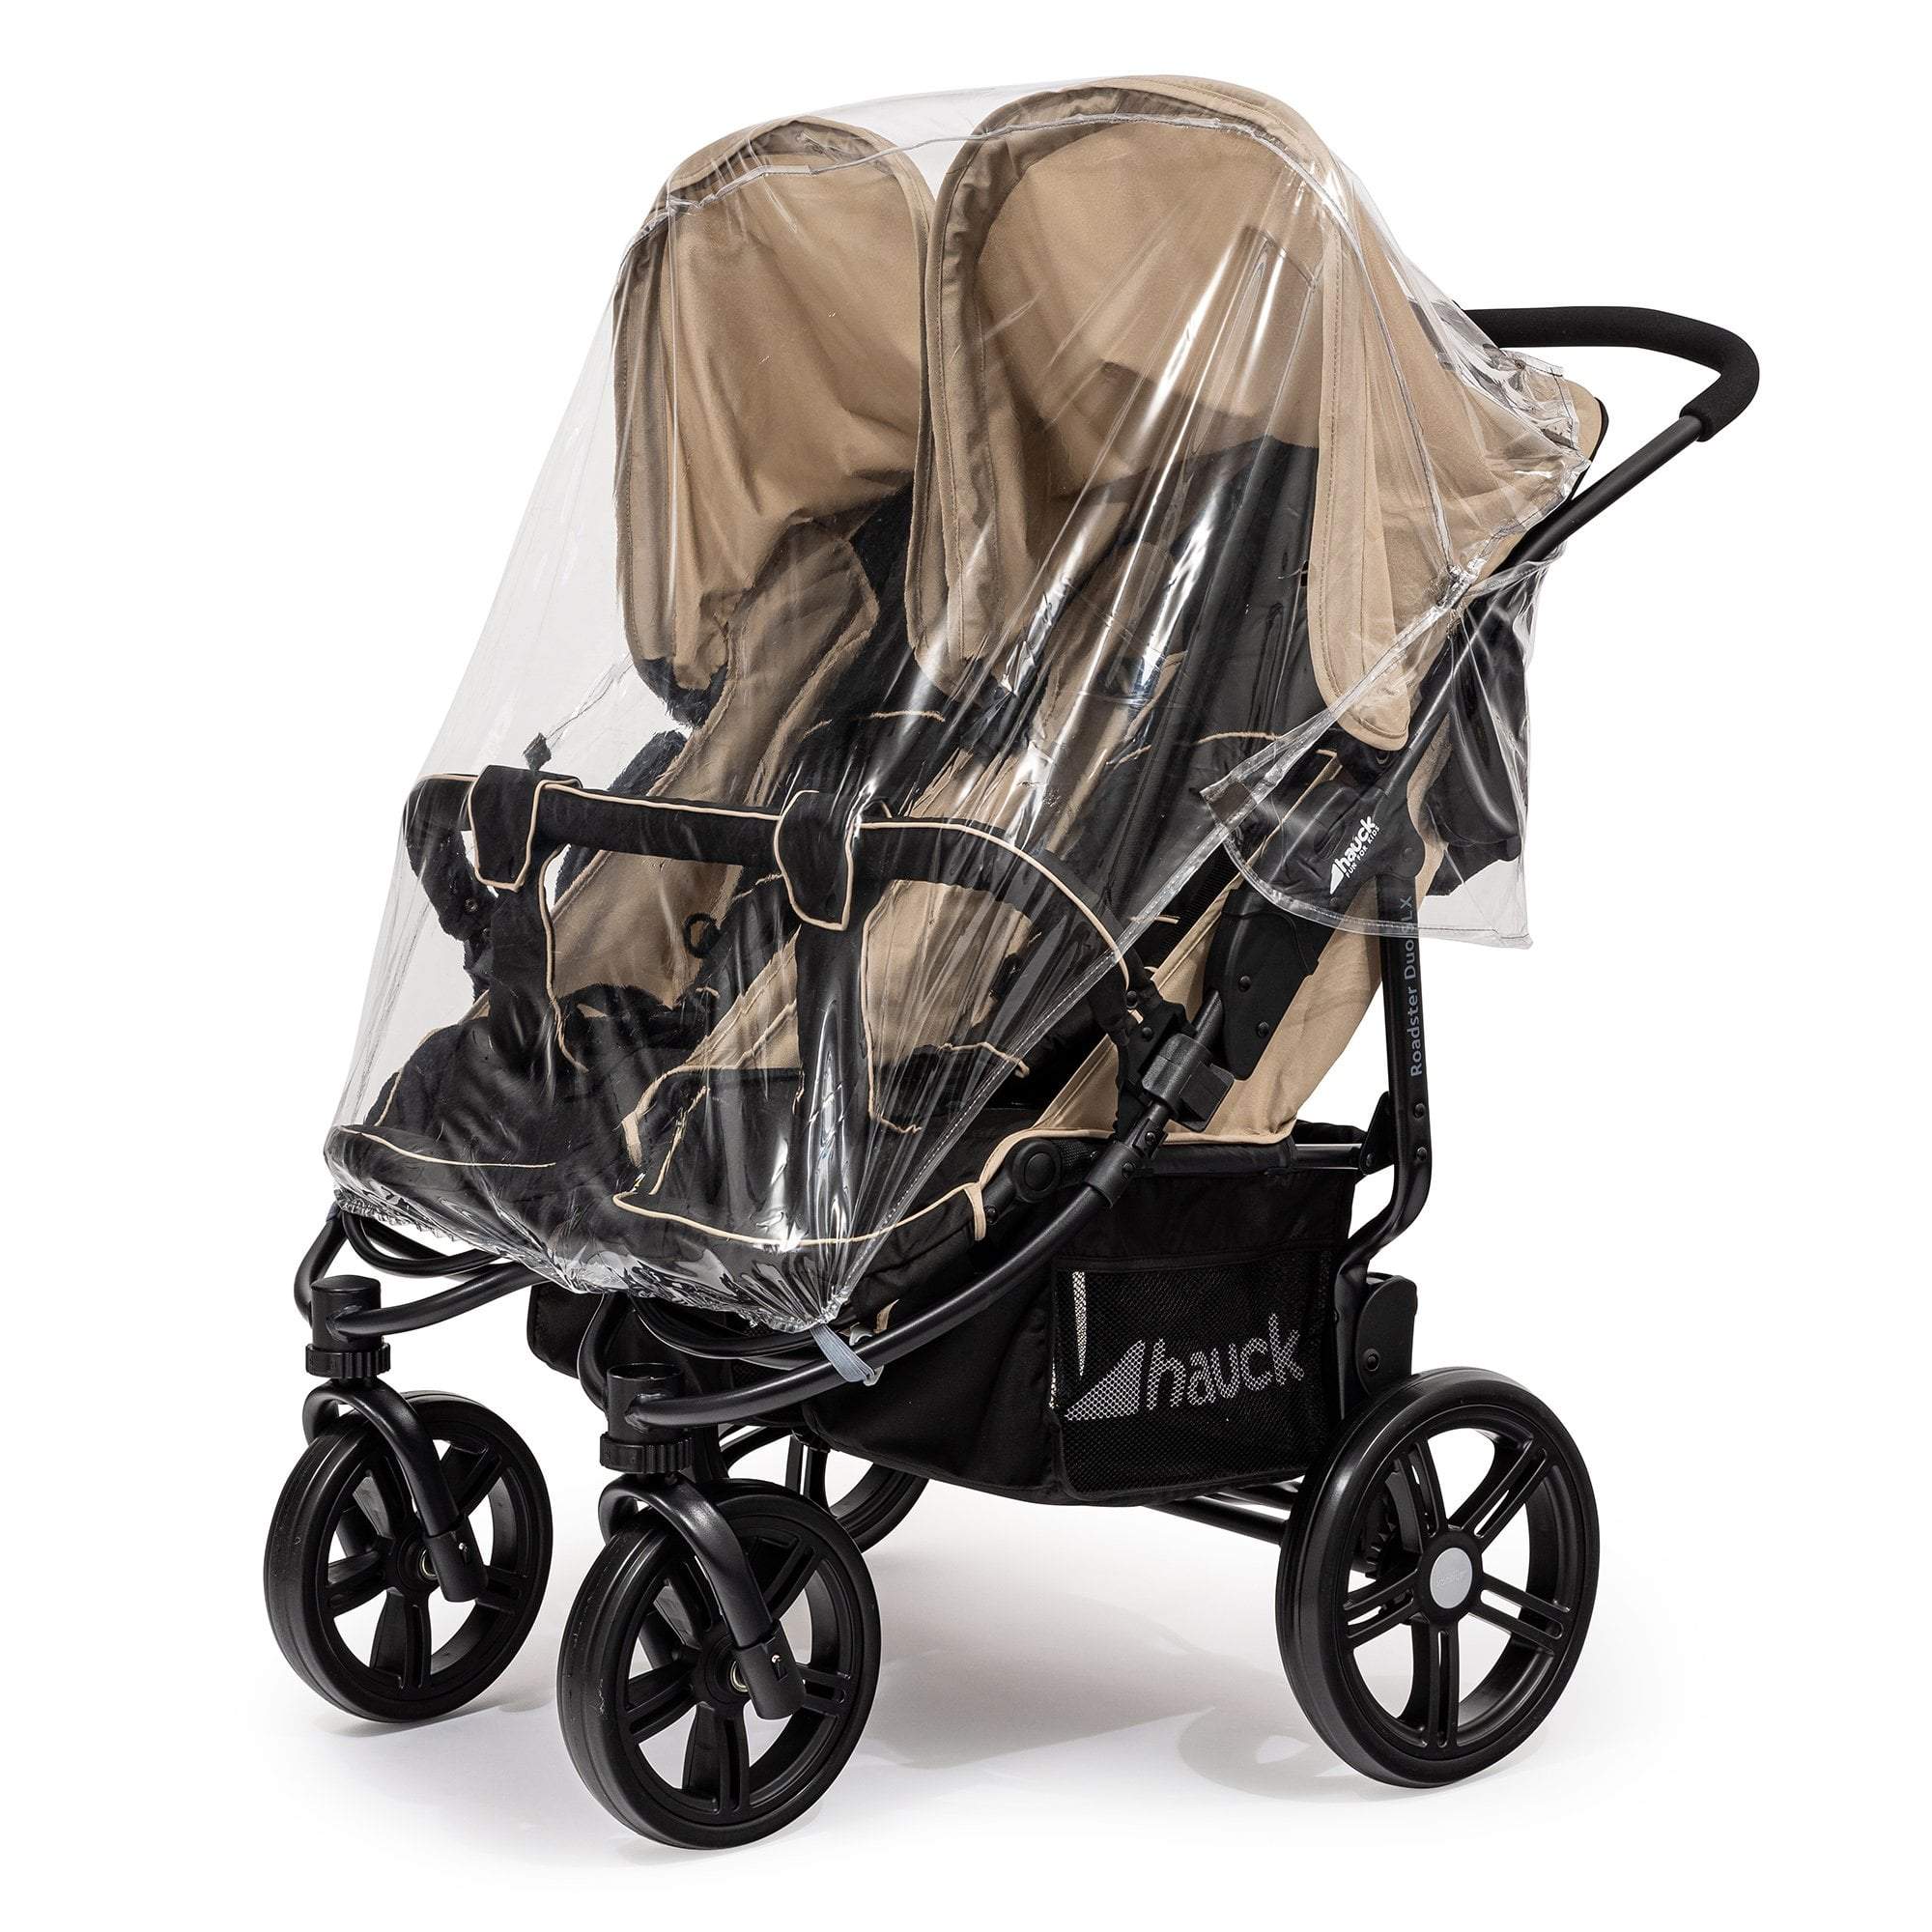 Side by Side Raincover Compatible with Mountain Buggy - For Your Little One